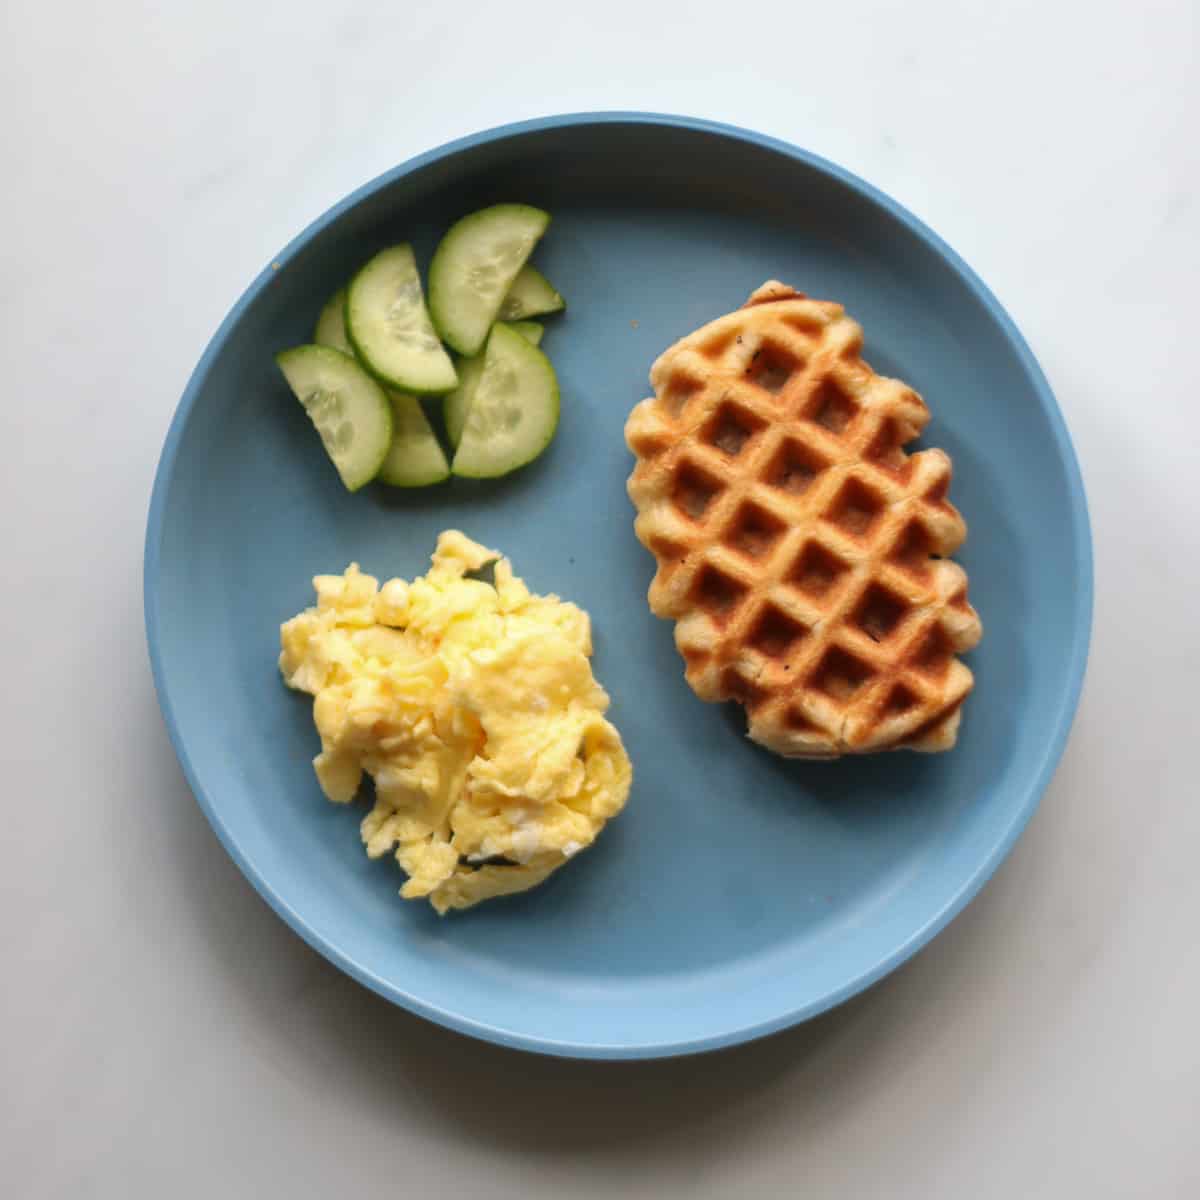 Croffle with scrambled eggs and cucumber on a blue plate.